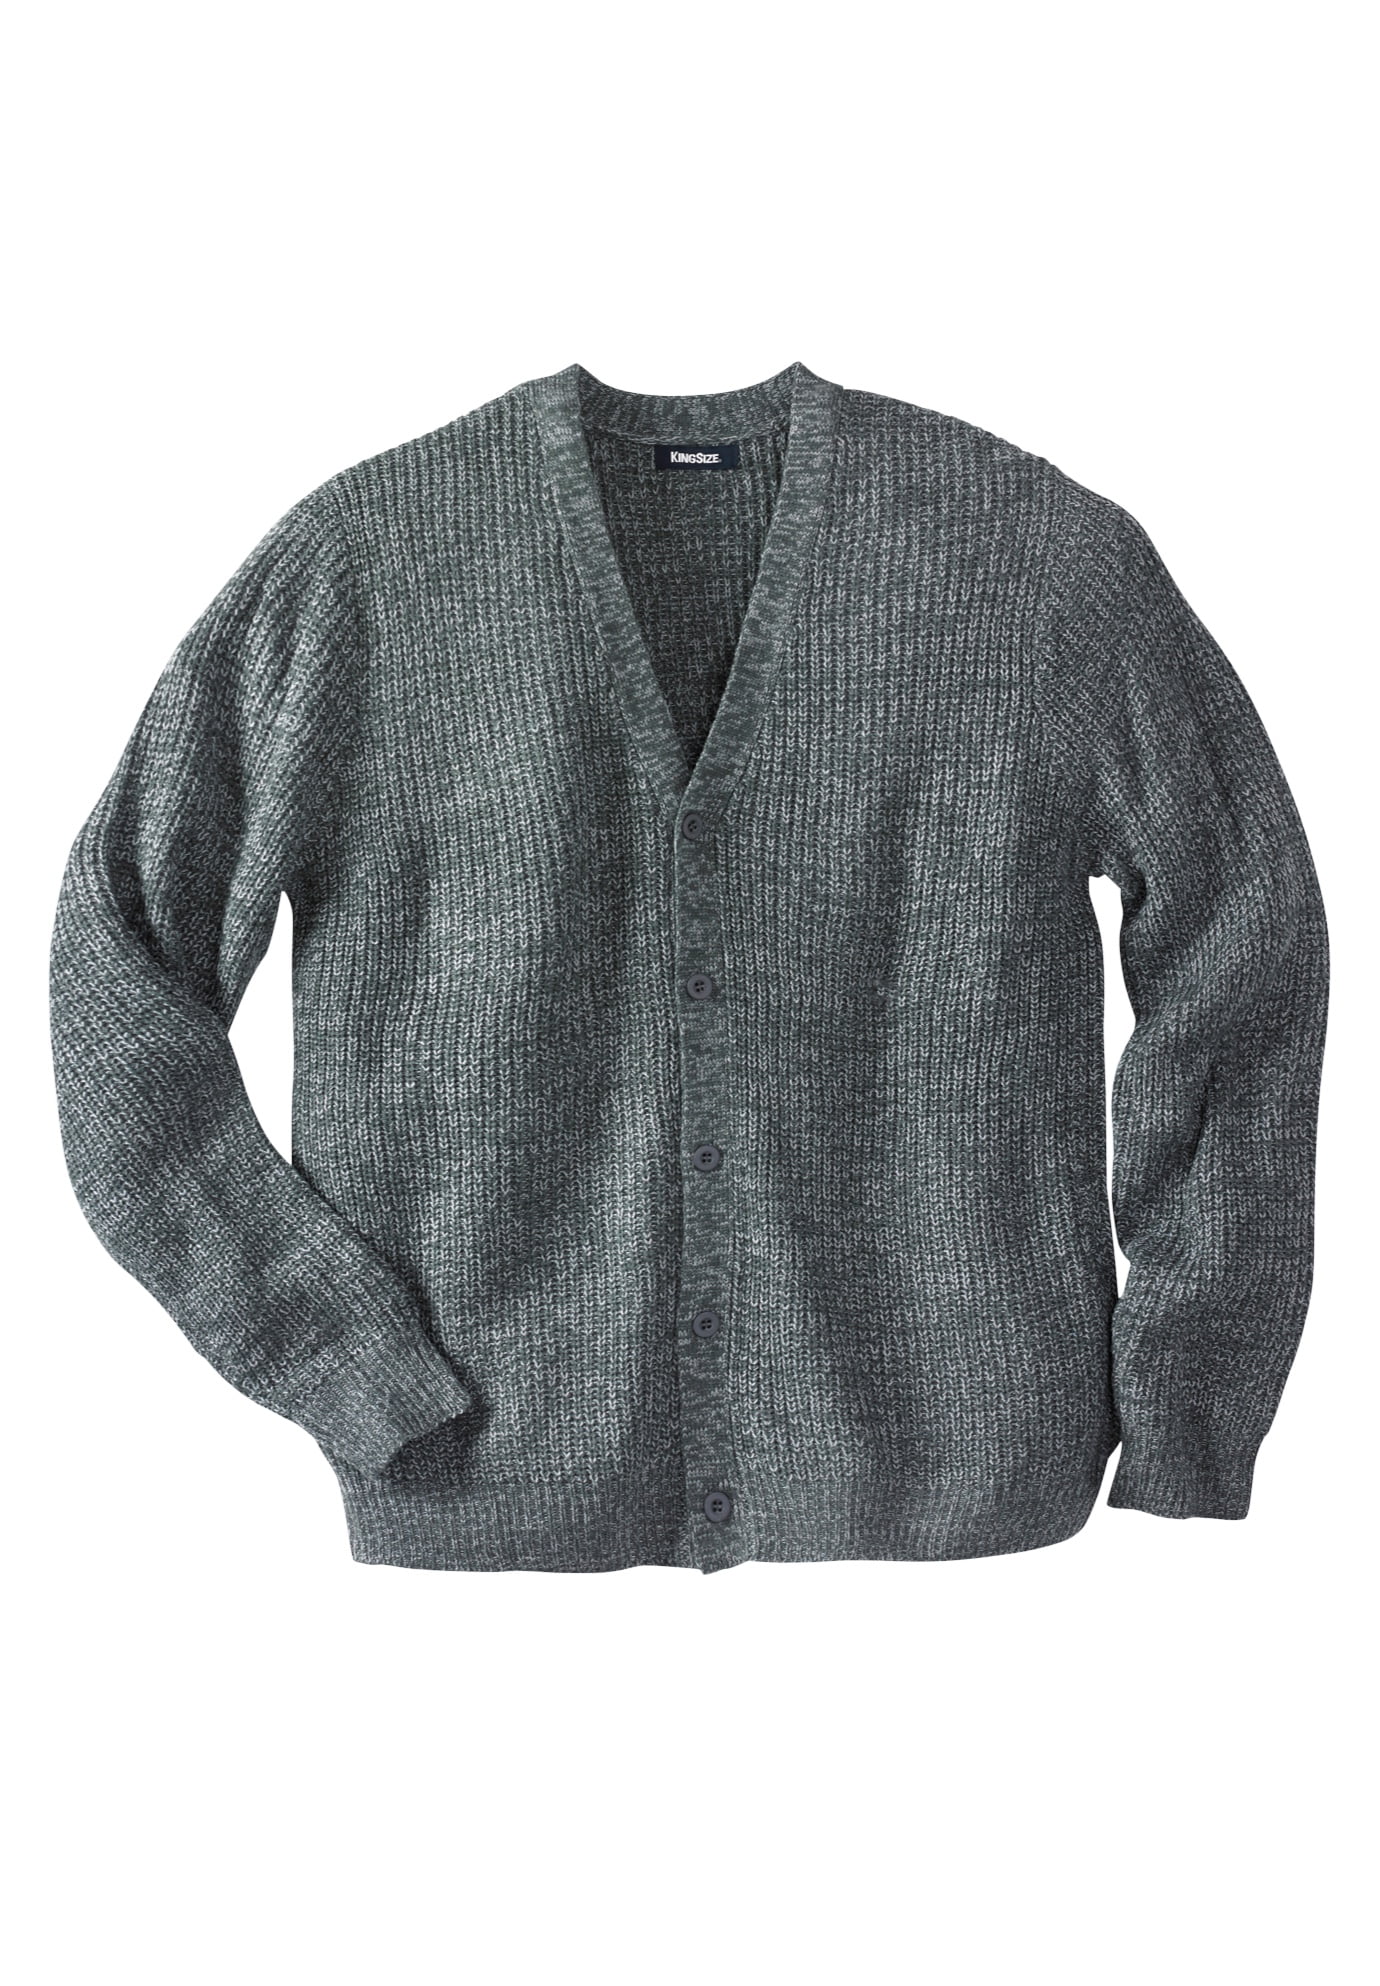 Men's Knitted Cardigans V Neck Classic Style Cardigan ACRYLIC S to 6XL big sizes 